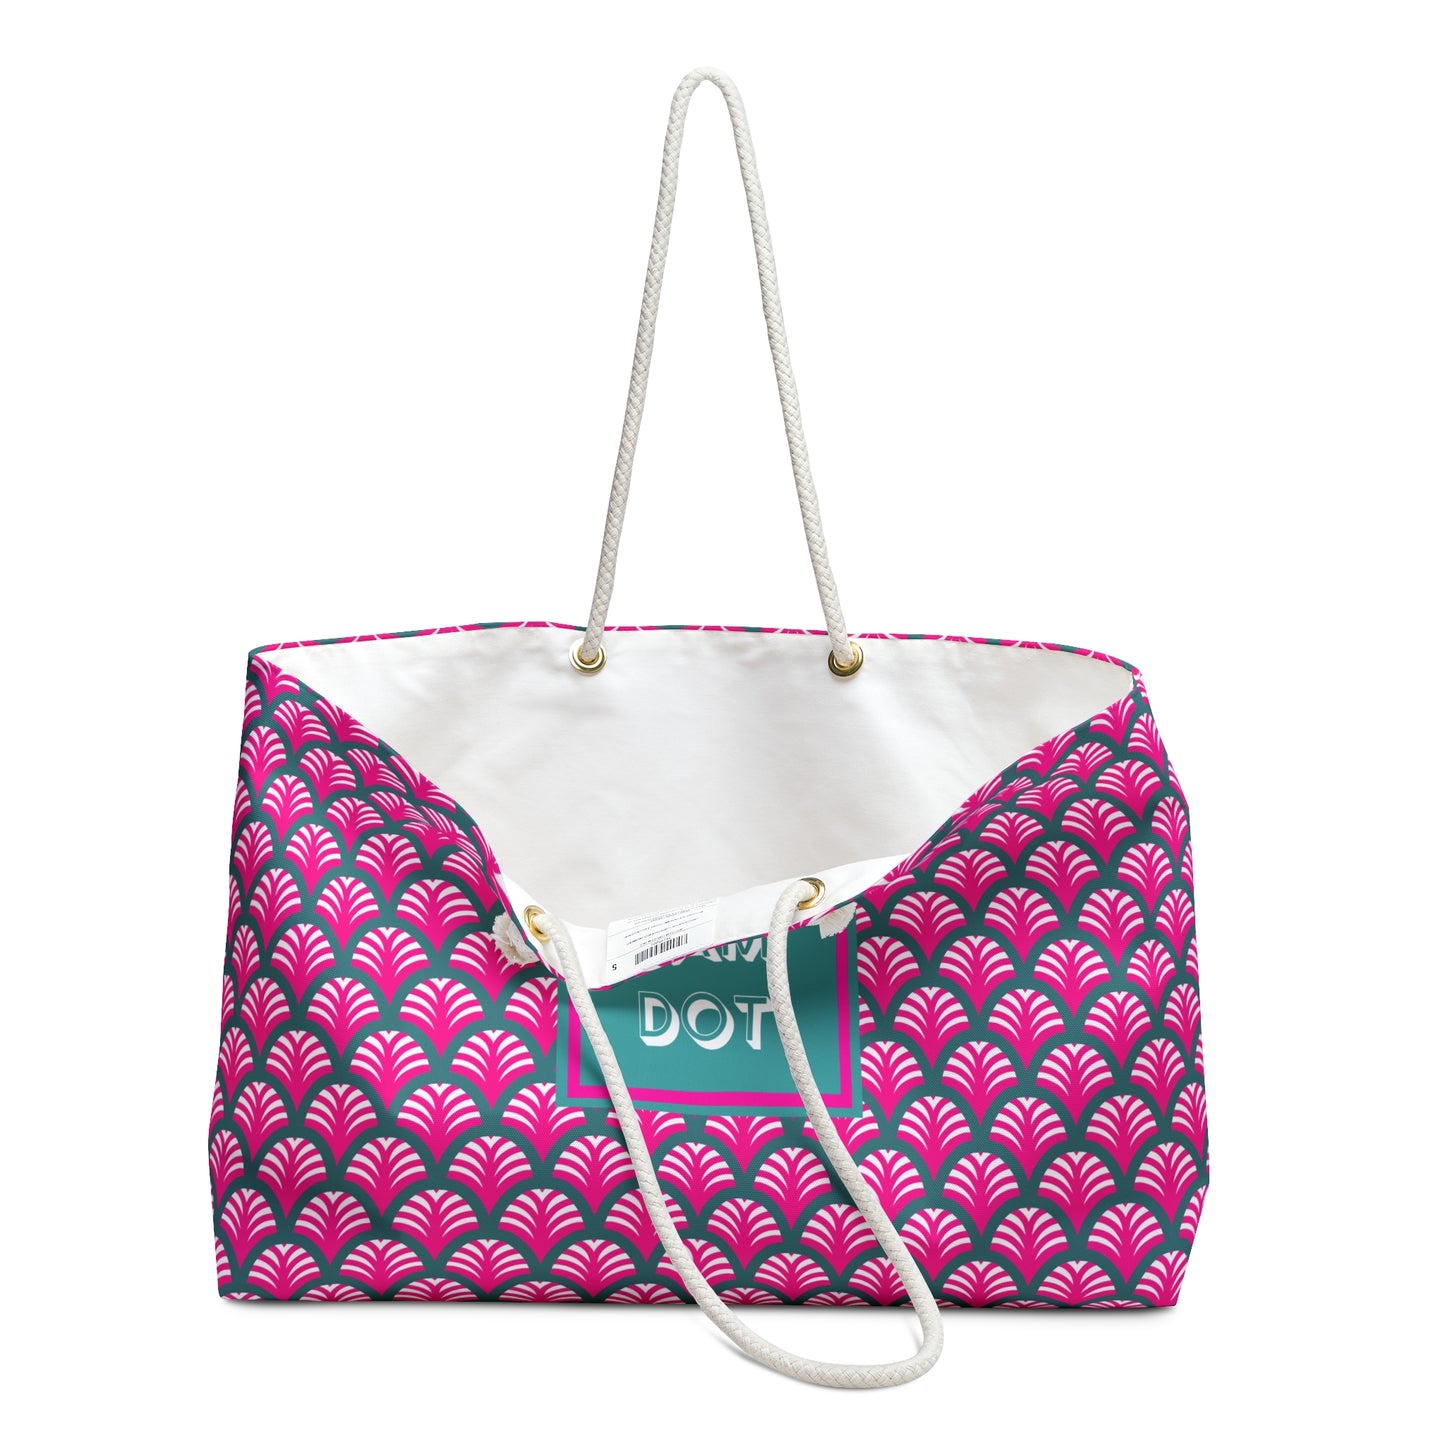 Mahjong Tote Bag. Oversize Mahjongg Carrying Bag Will Hold All Your Mah Jongg Tiles, Accessories and More! Great Gift Idea!! Pink & Green.